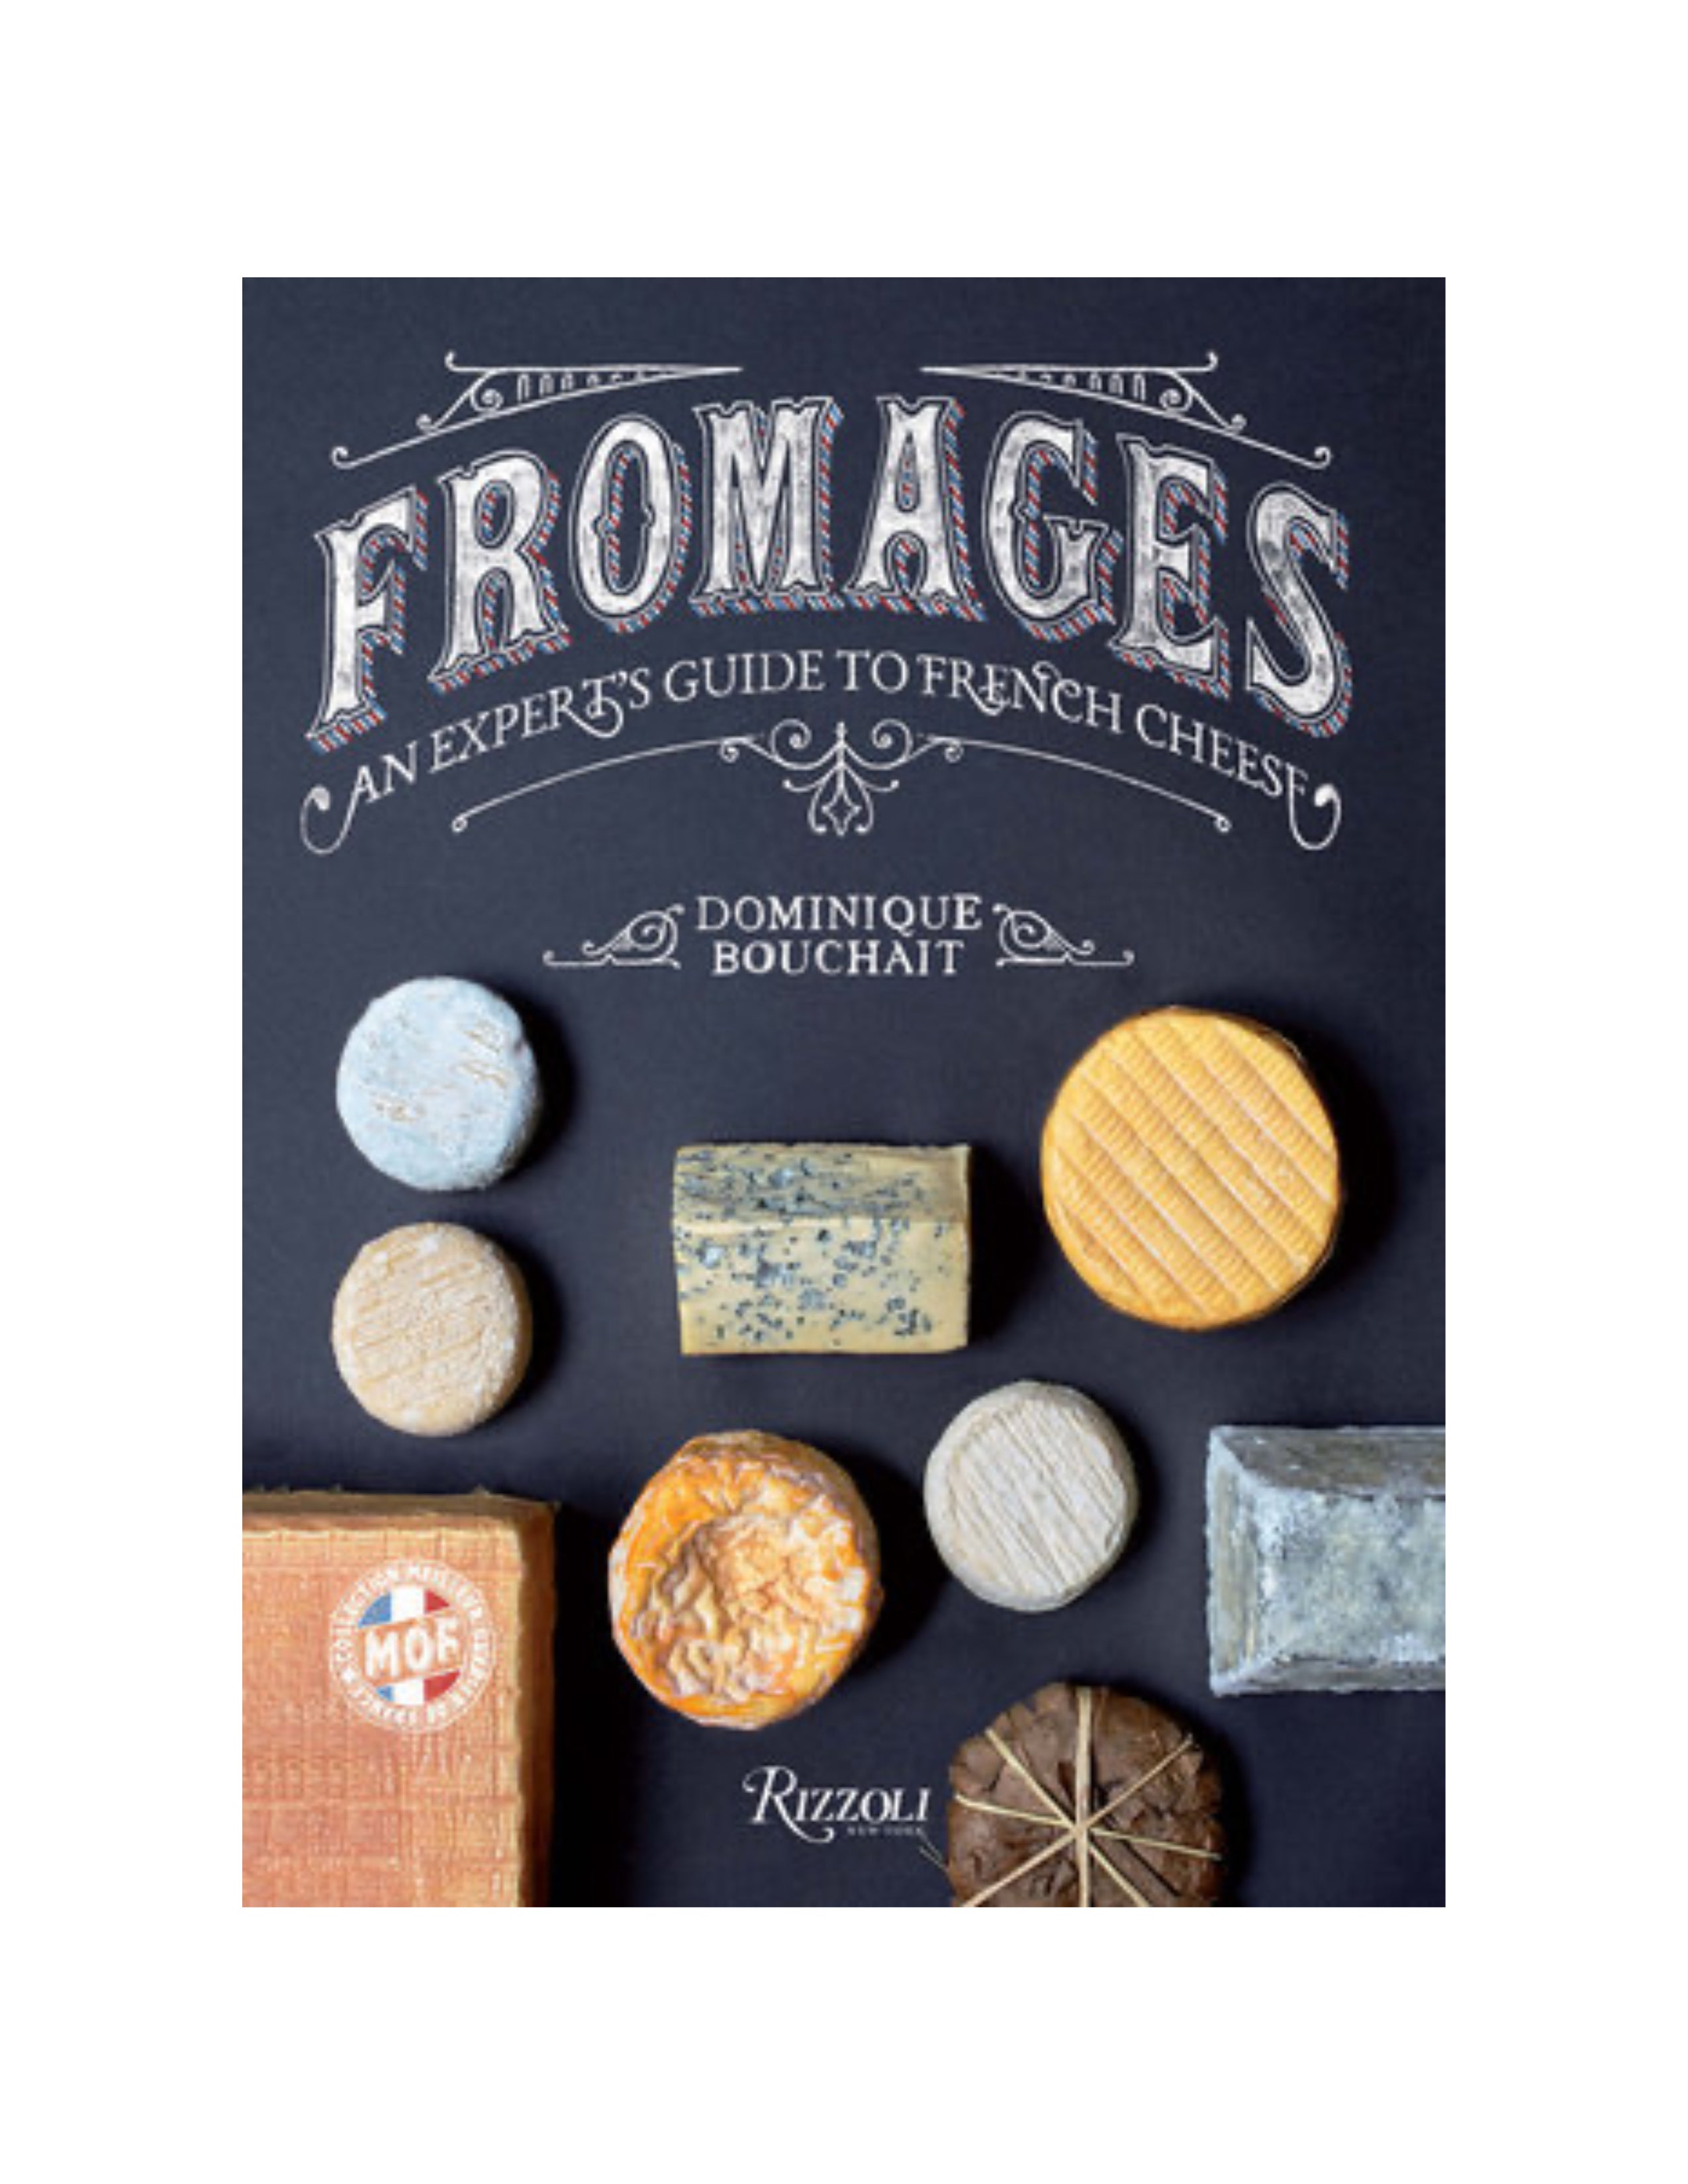 Fromages An Expert's Guide to French Cheese